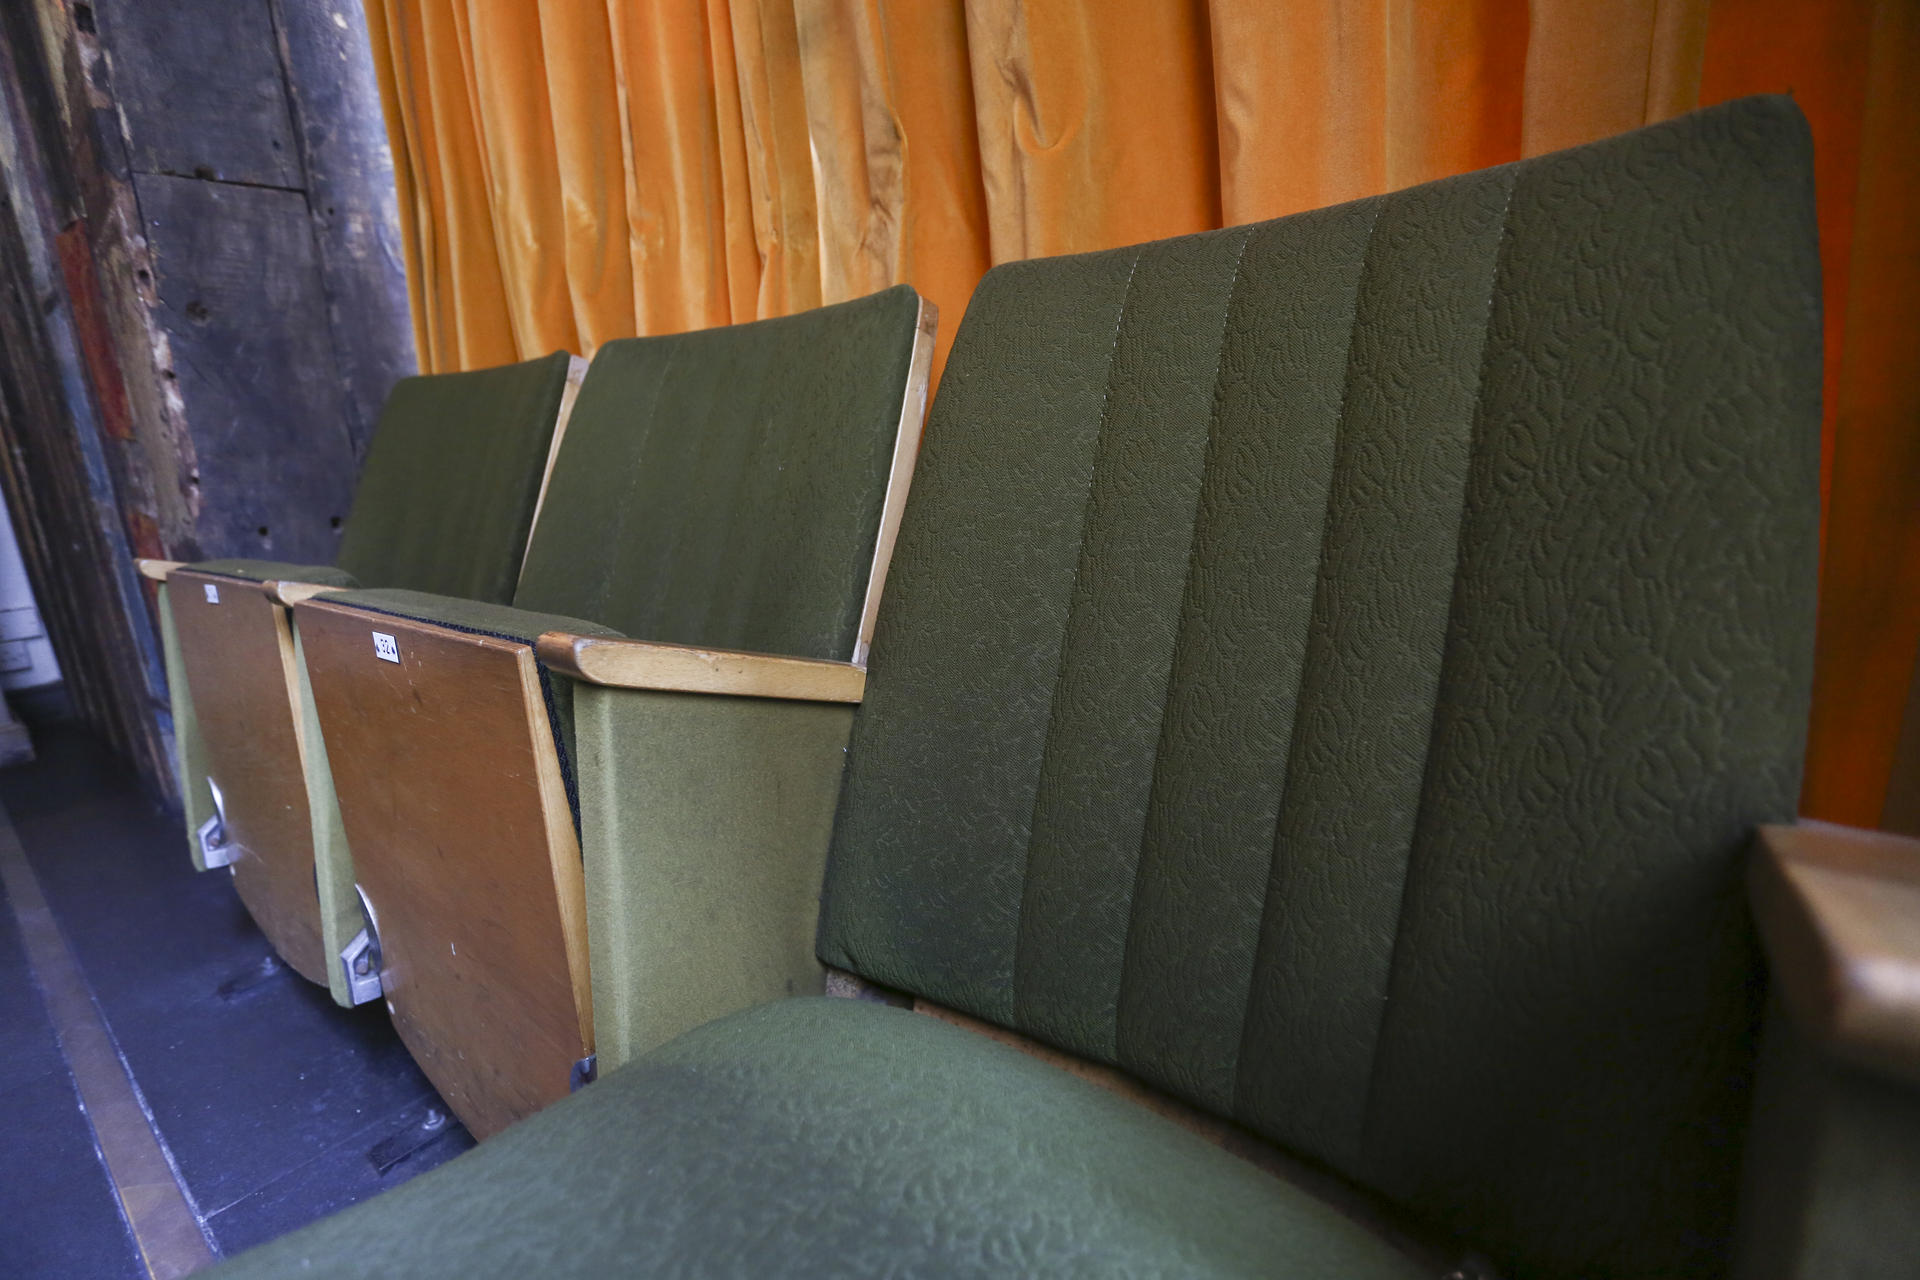 Vintage cinema seats and an adding machine (below) will be among the items for sale. Photos: Jonathan Wong